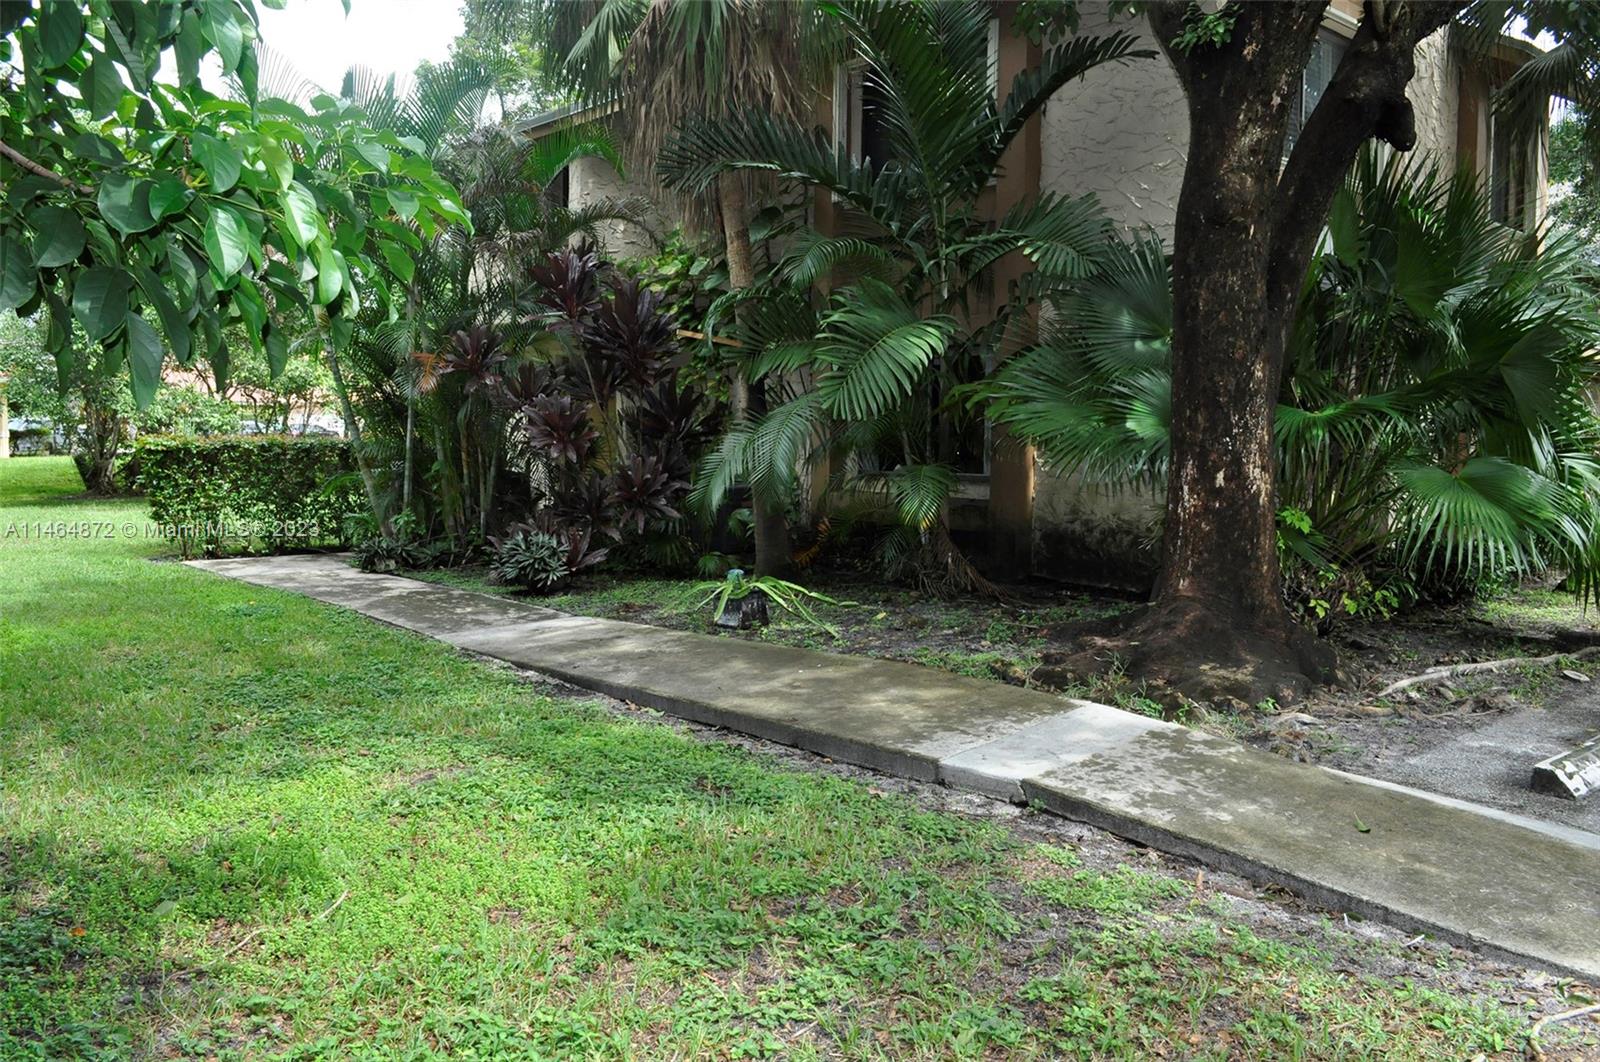 a view of a yard with plants and trees